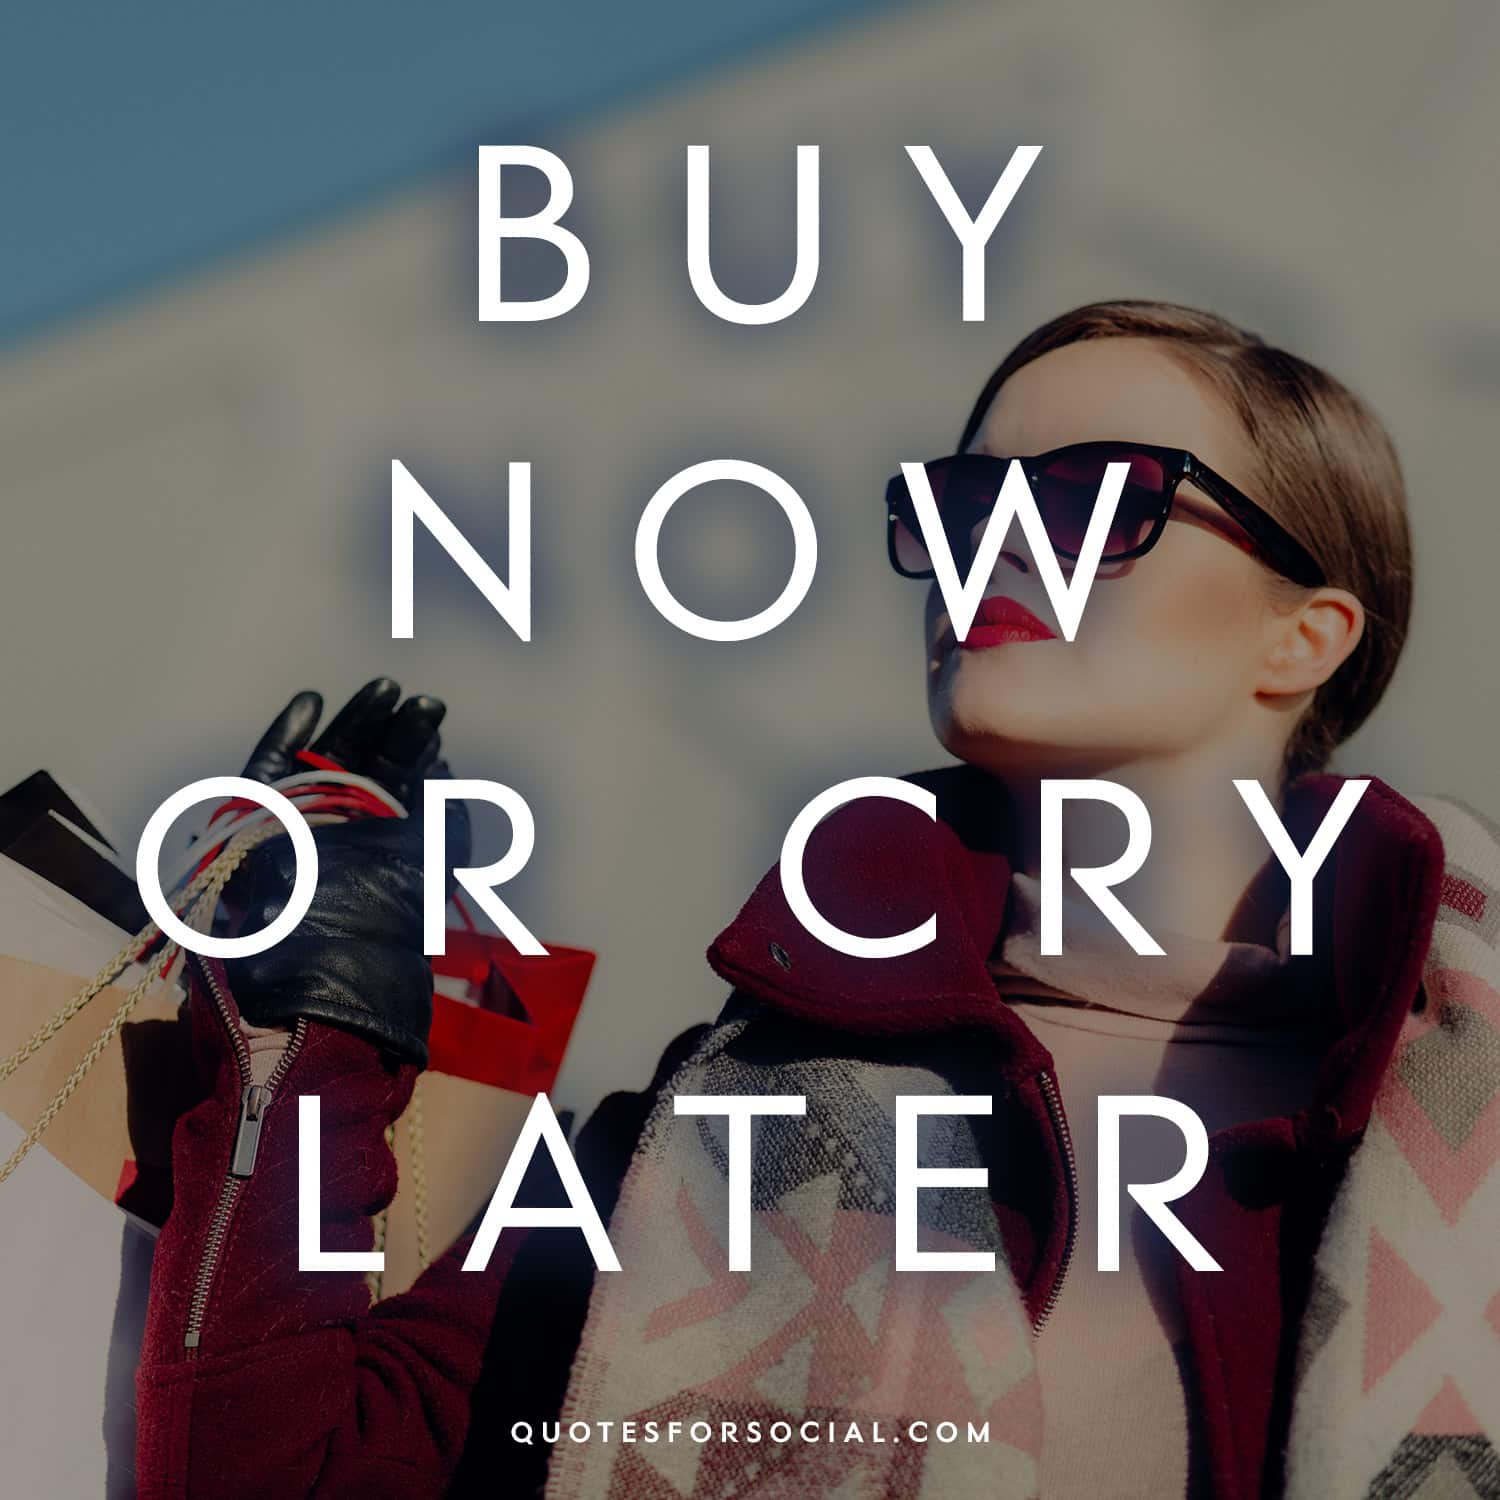 Shopping quotes for Instagram